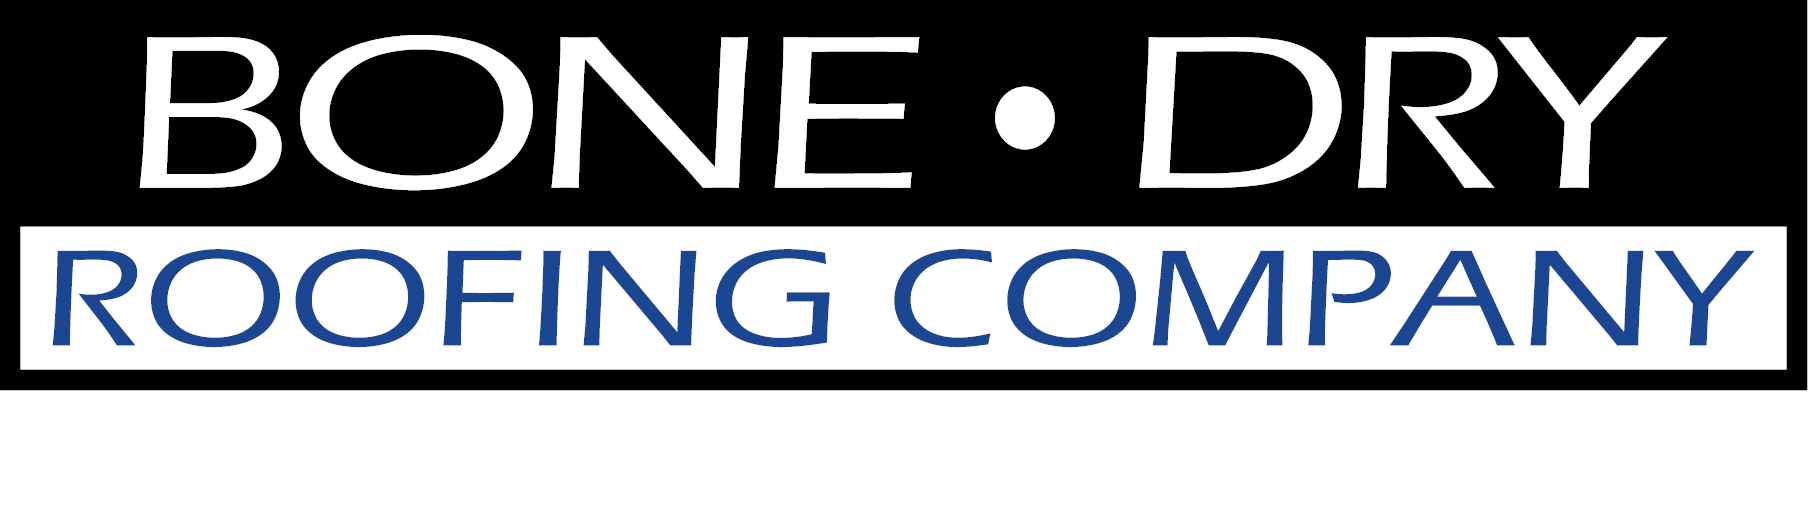 Bone Dry Roofing roofing company in Georgia